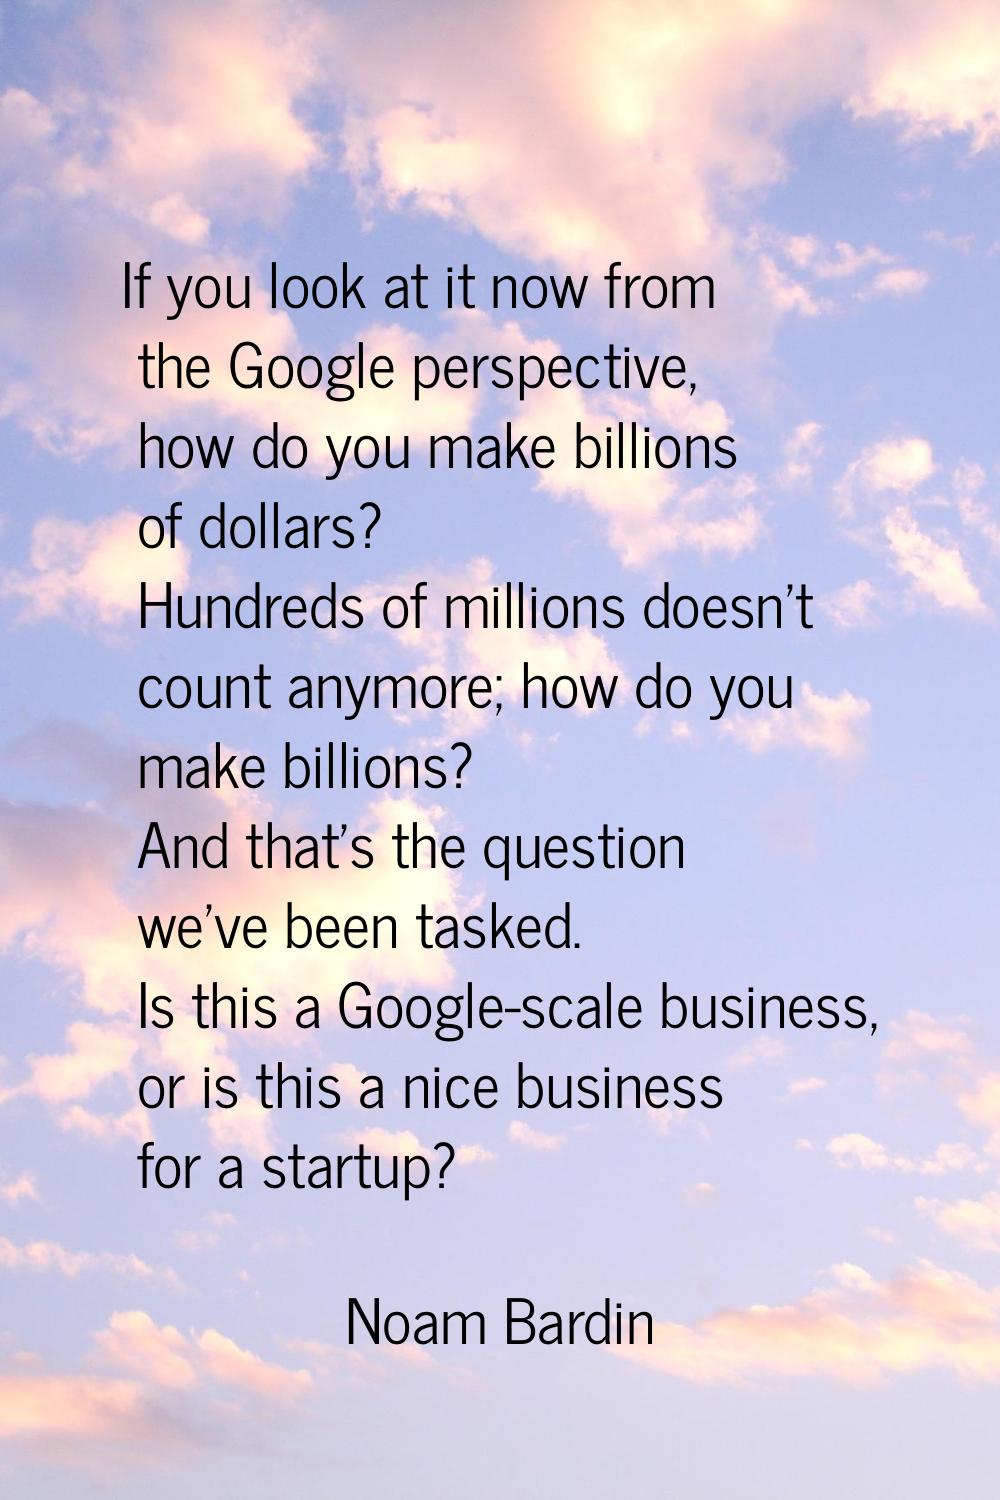 If you look at it now from the Google perspective, how do you make billions of dollars? Hundreds of